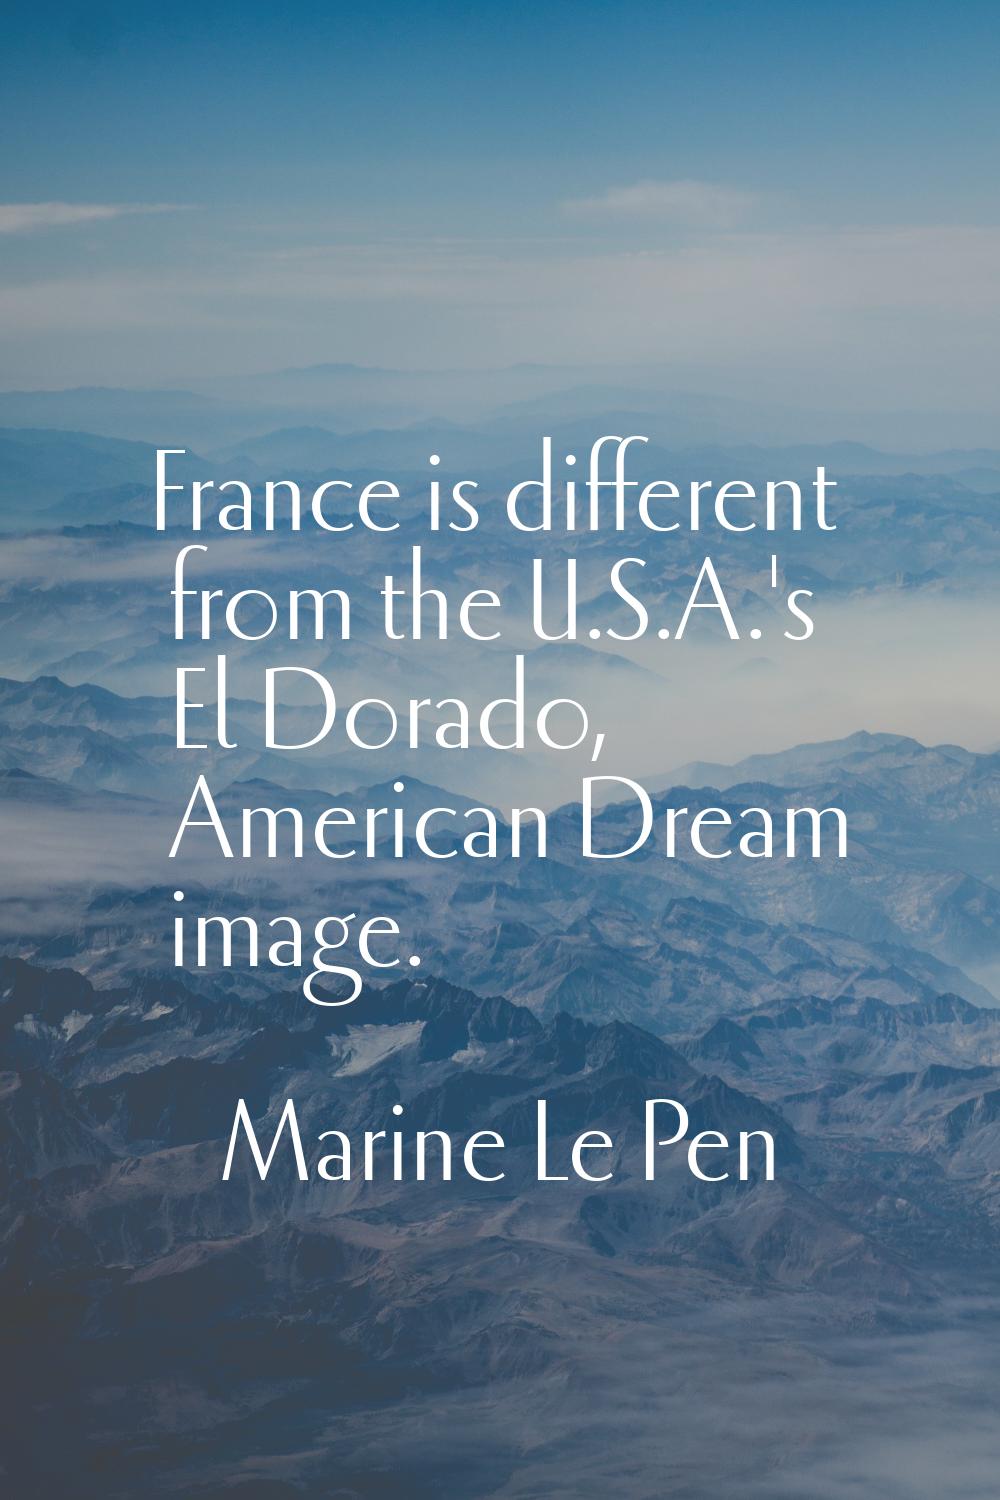 France is different from the U.S.A.'s El Dorado, American Dream image.